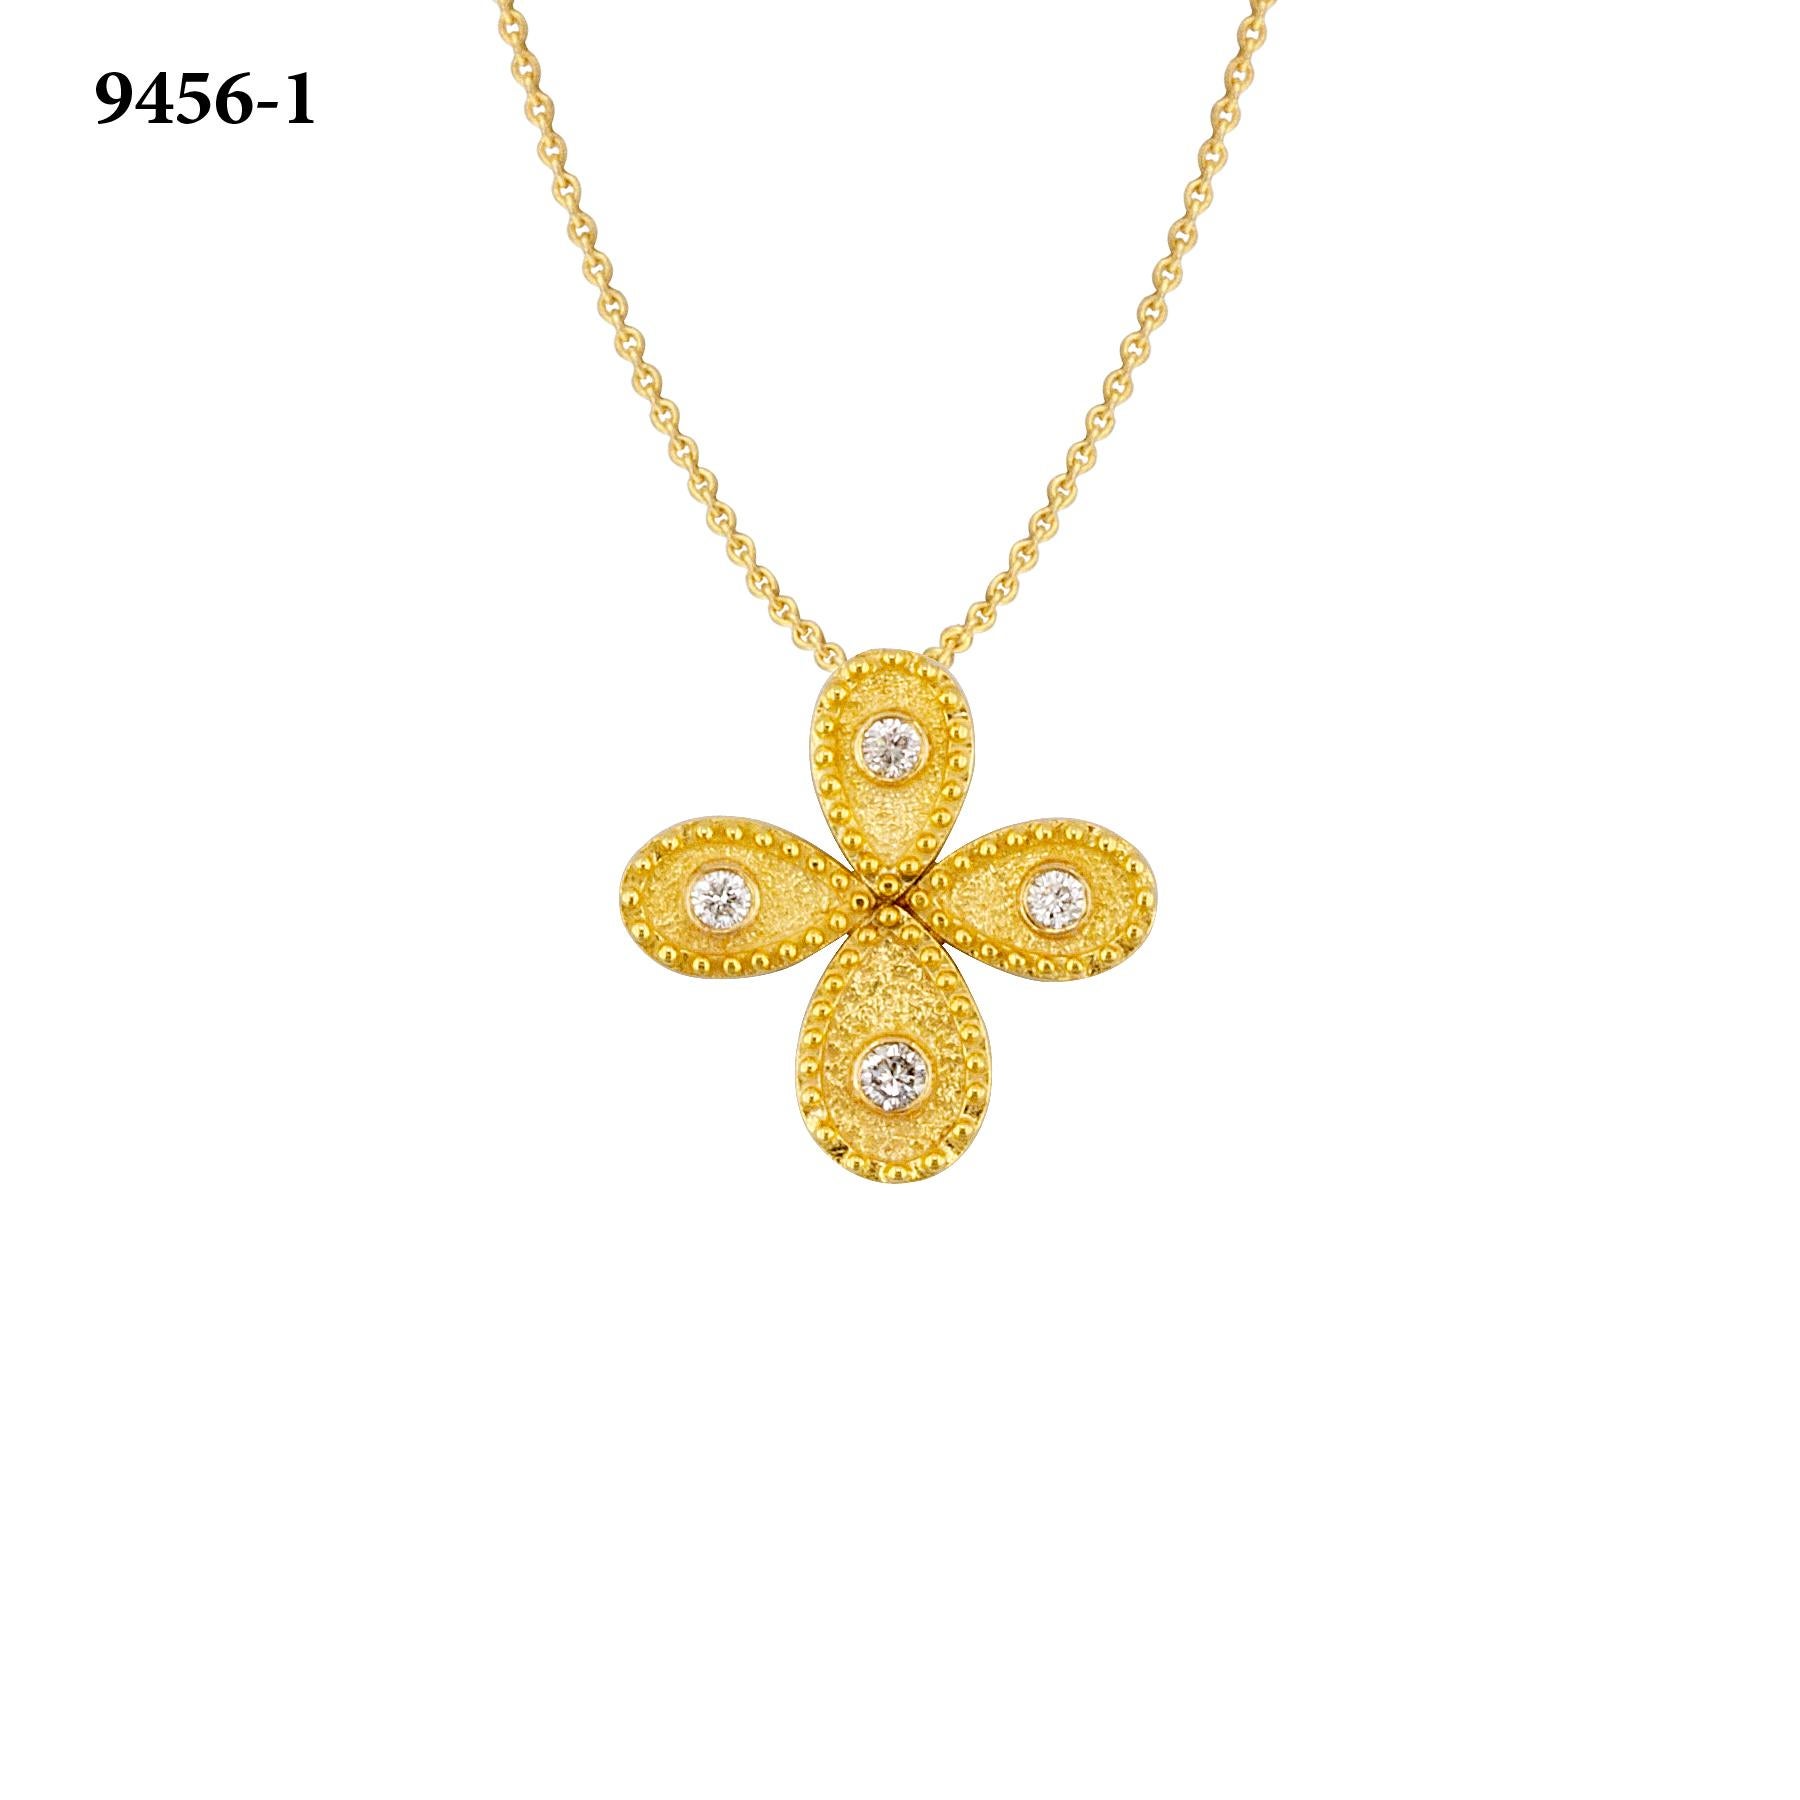 S.Georgios Cross Necklace is all handmade from solid 18 Karat Yellow Gold and is microscopically decorated with granulation work all the way around. The background of the Cross has a unique velvet look and features 4 Brilliant cut Diamonds total